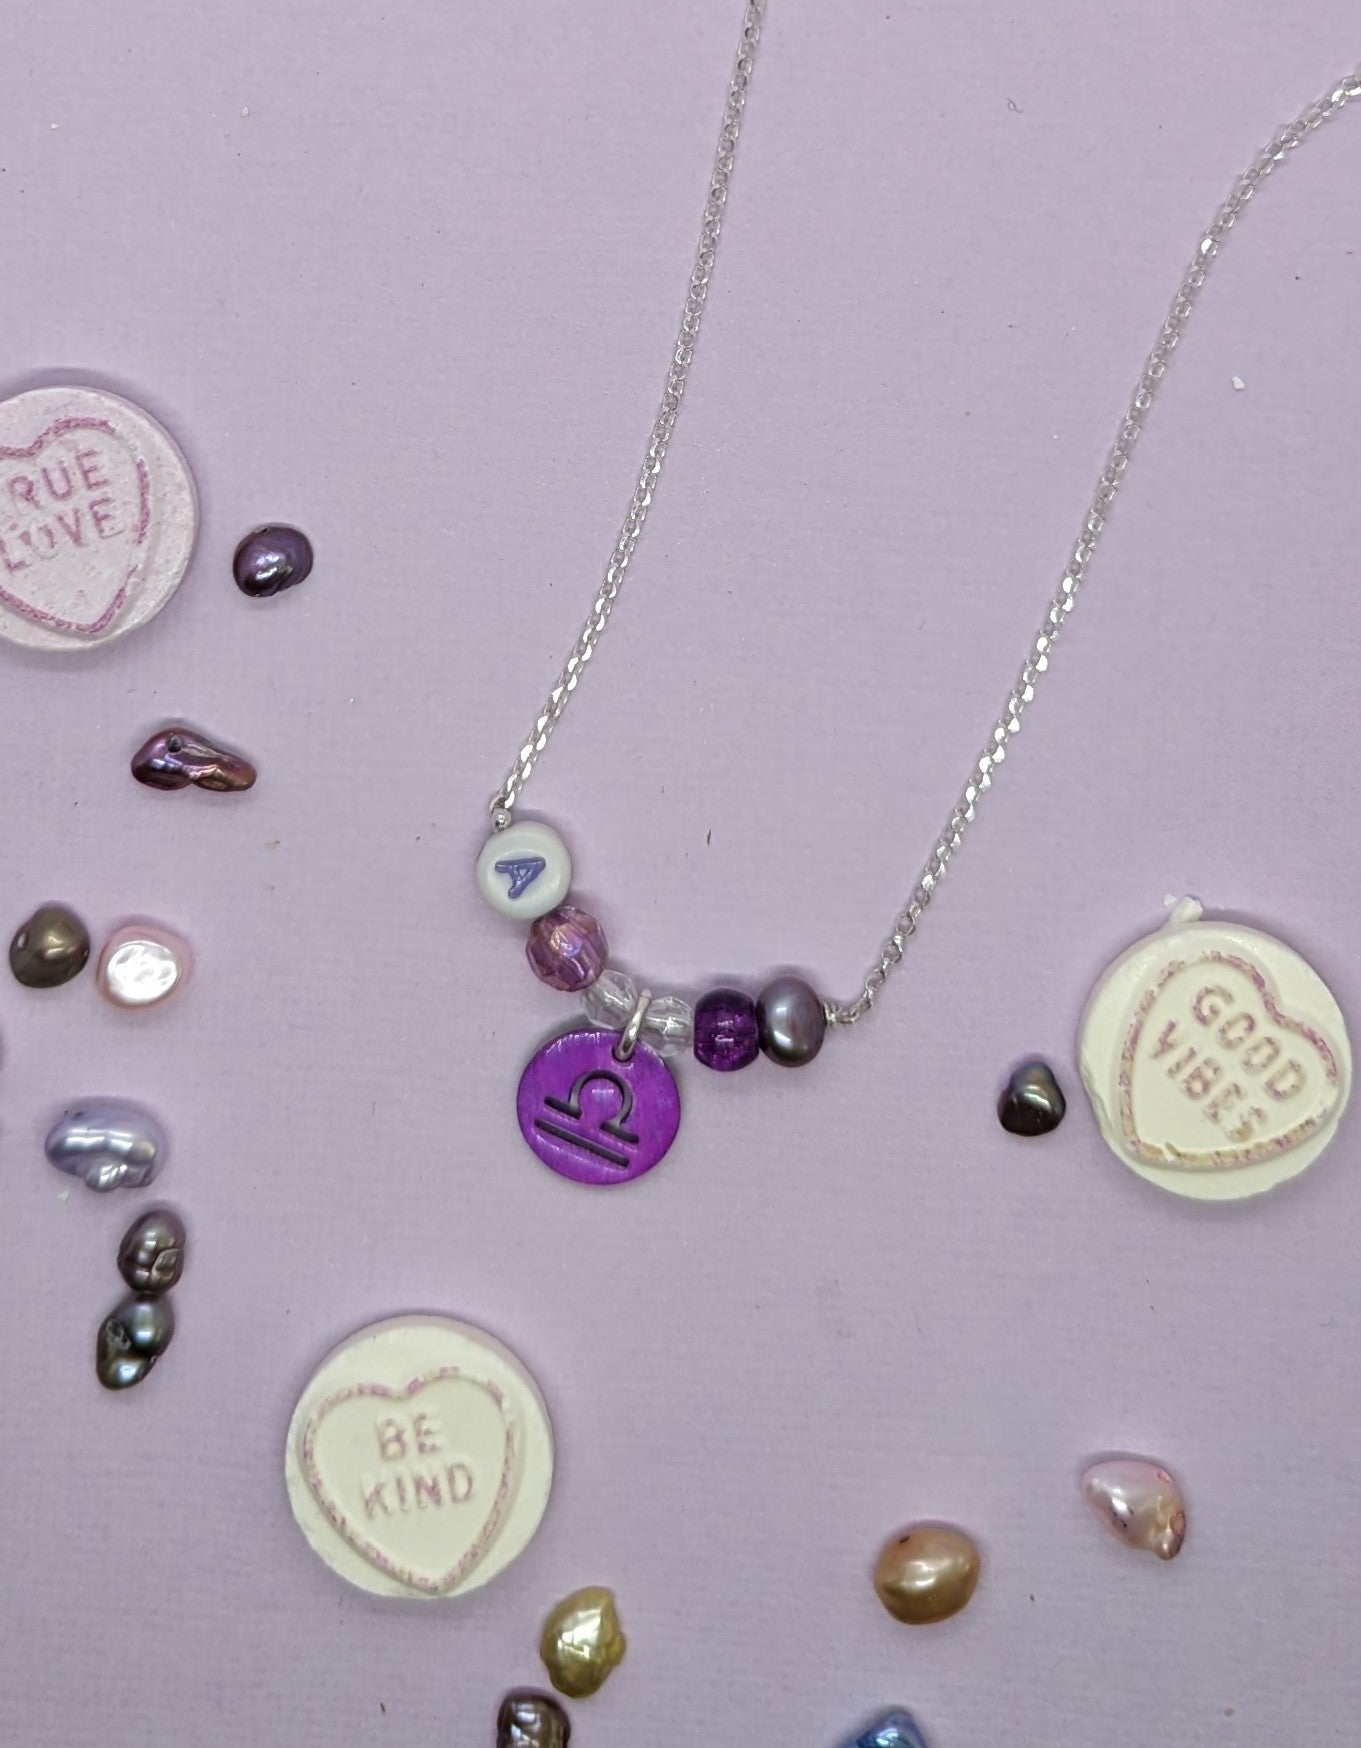 Libra star sign personalised necklace in purple. 